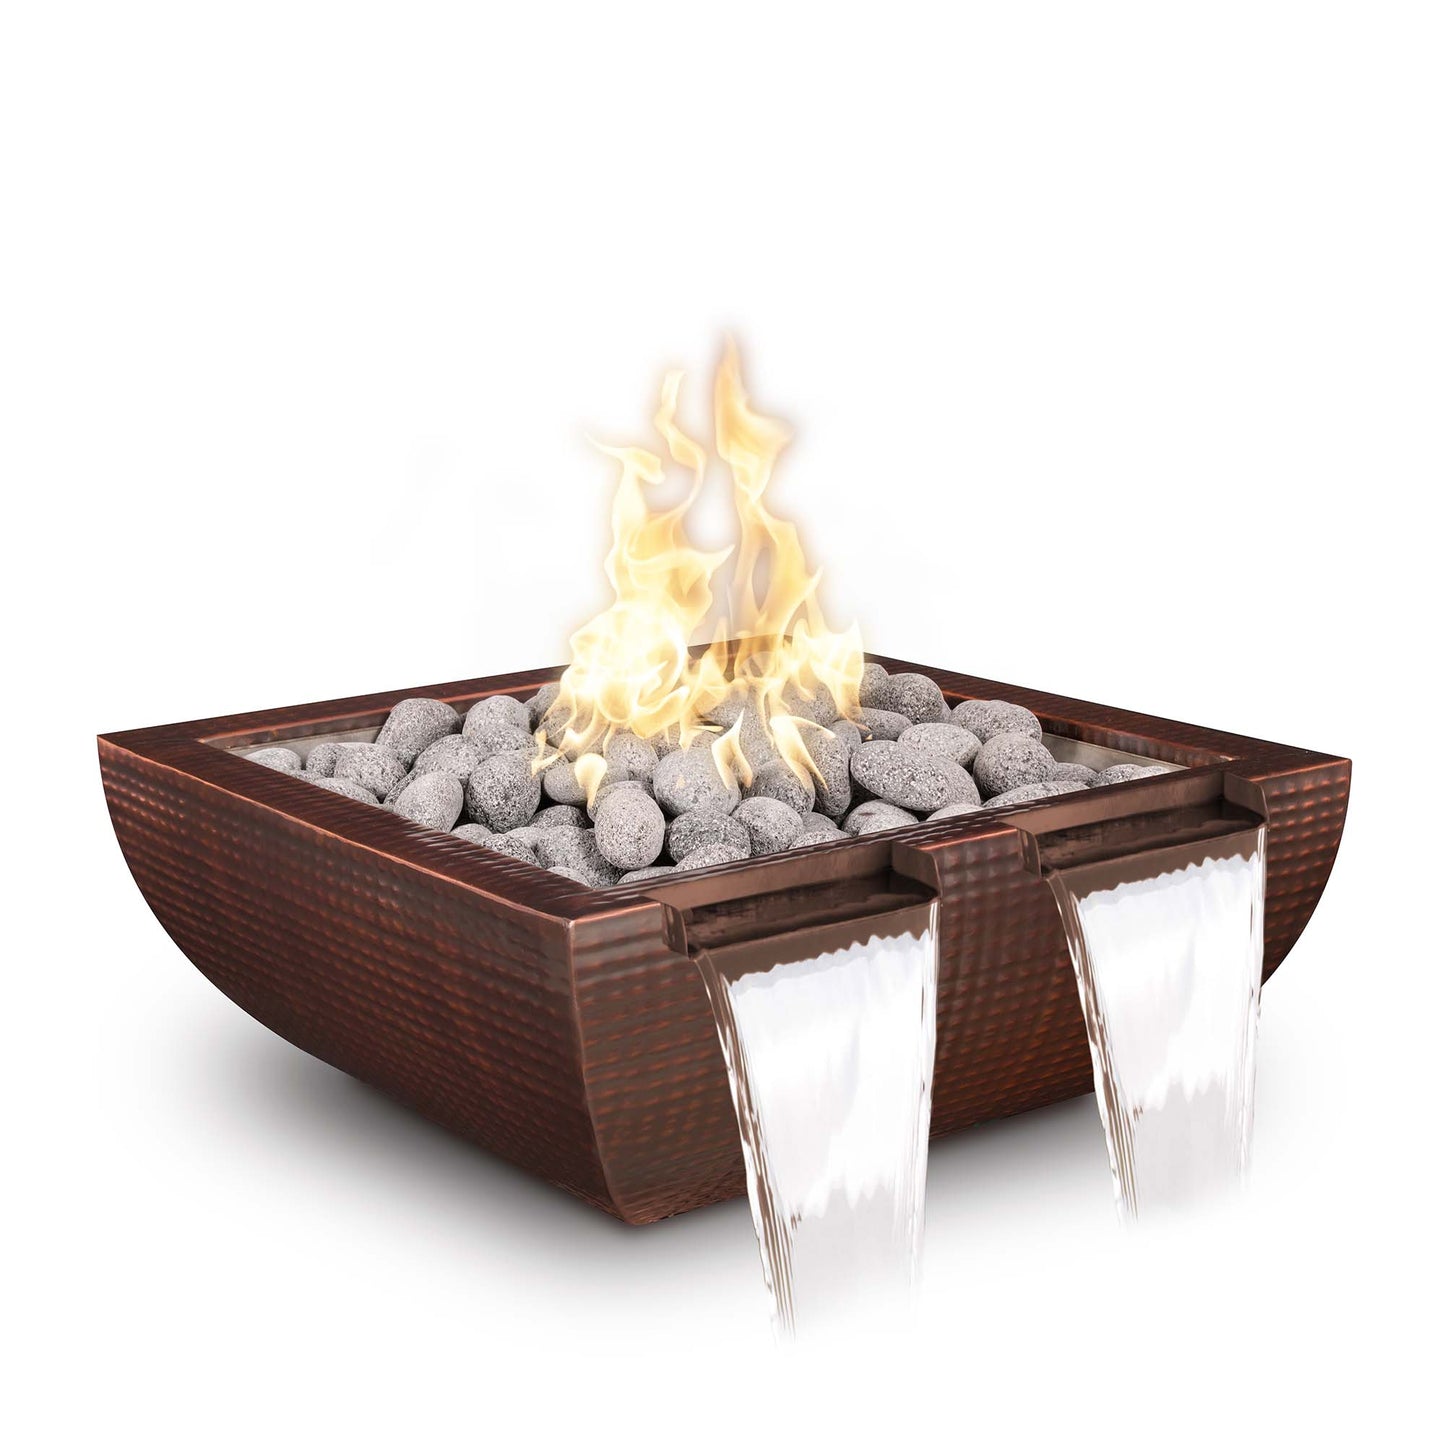 The Outdoor Plus Avalon Twin Spill 30" Copper Vein Powder Coated Metal Natural Gas Fire & Water Bowl with Match Lit Ignition